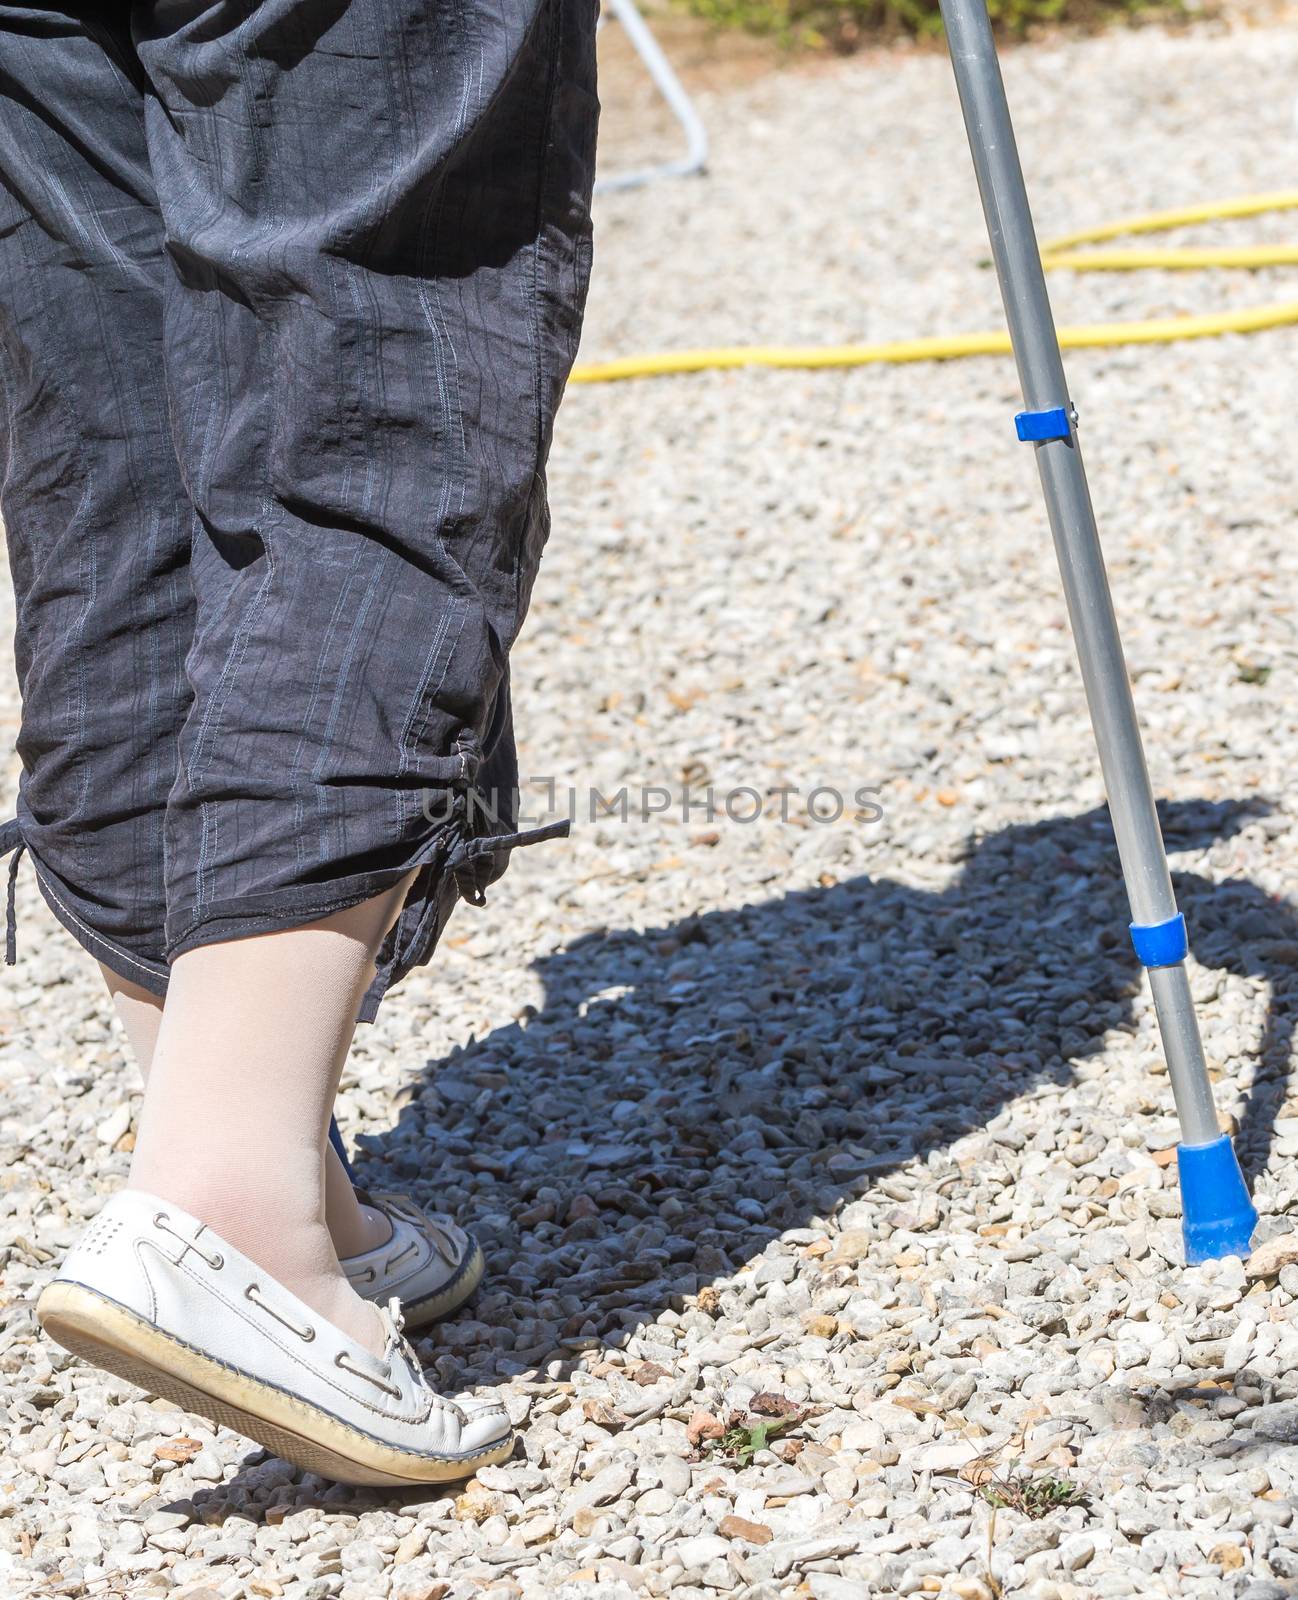 Closeup of Senior woman walking with crutches in her garden